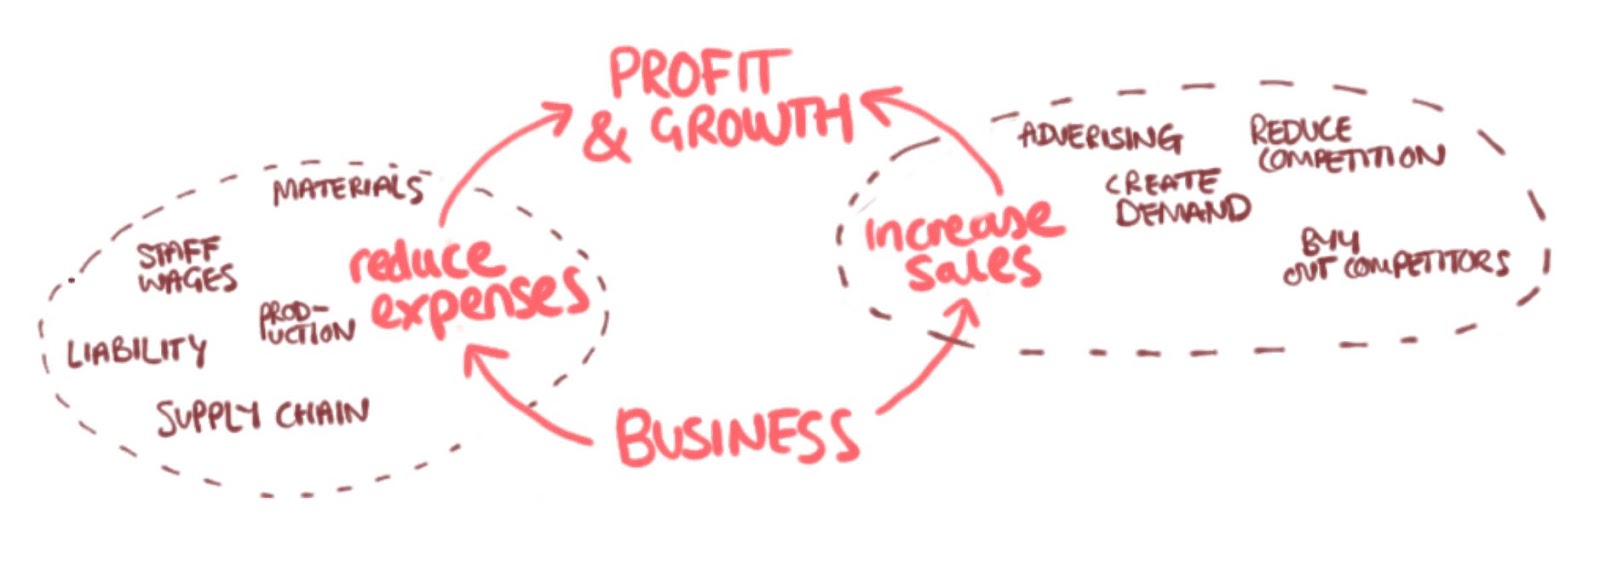 How businesses increase sales and reduce expenses for continuous profit and growth